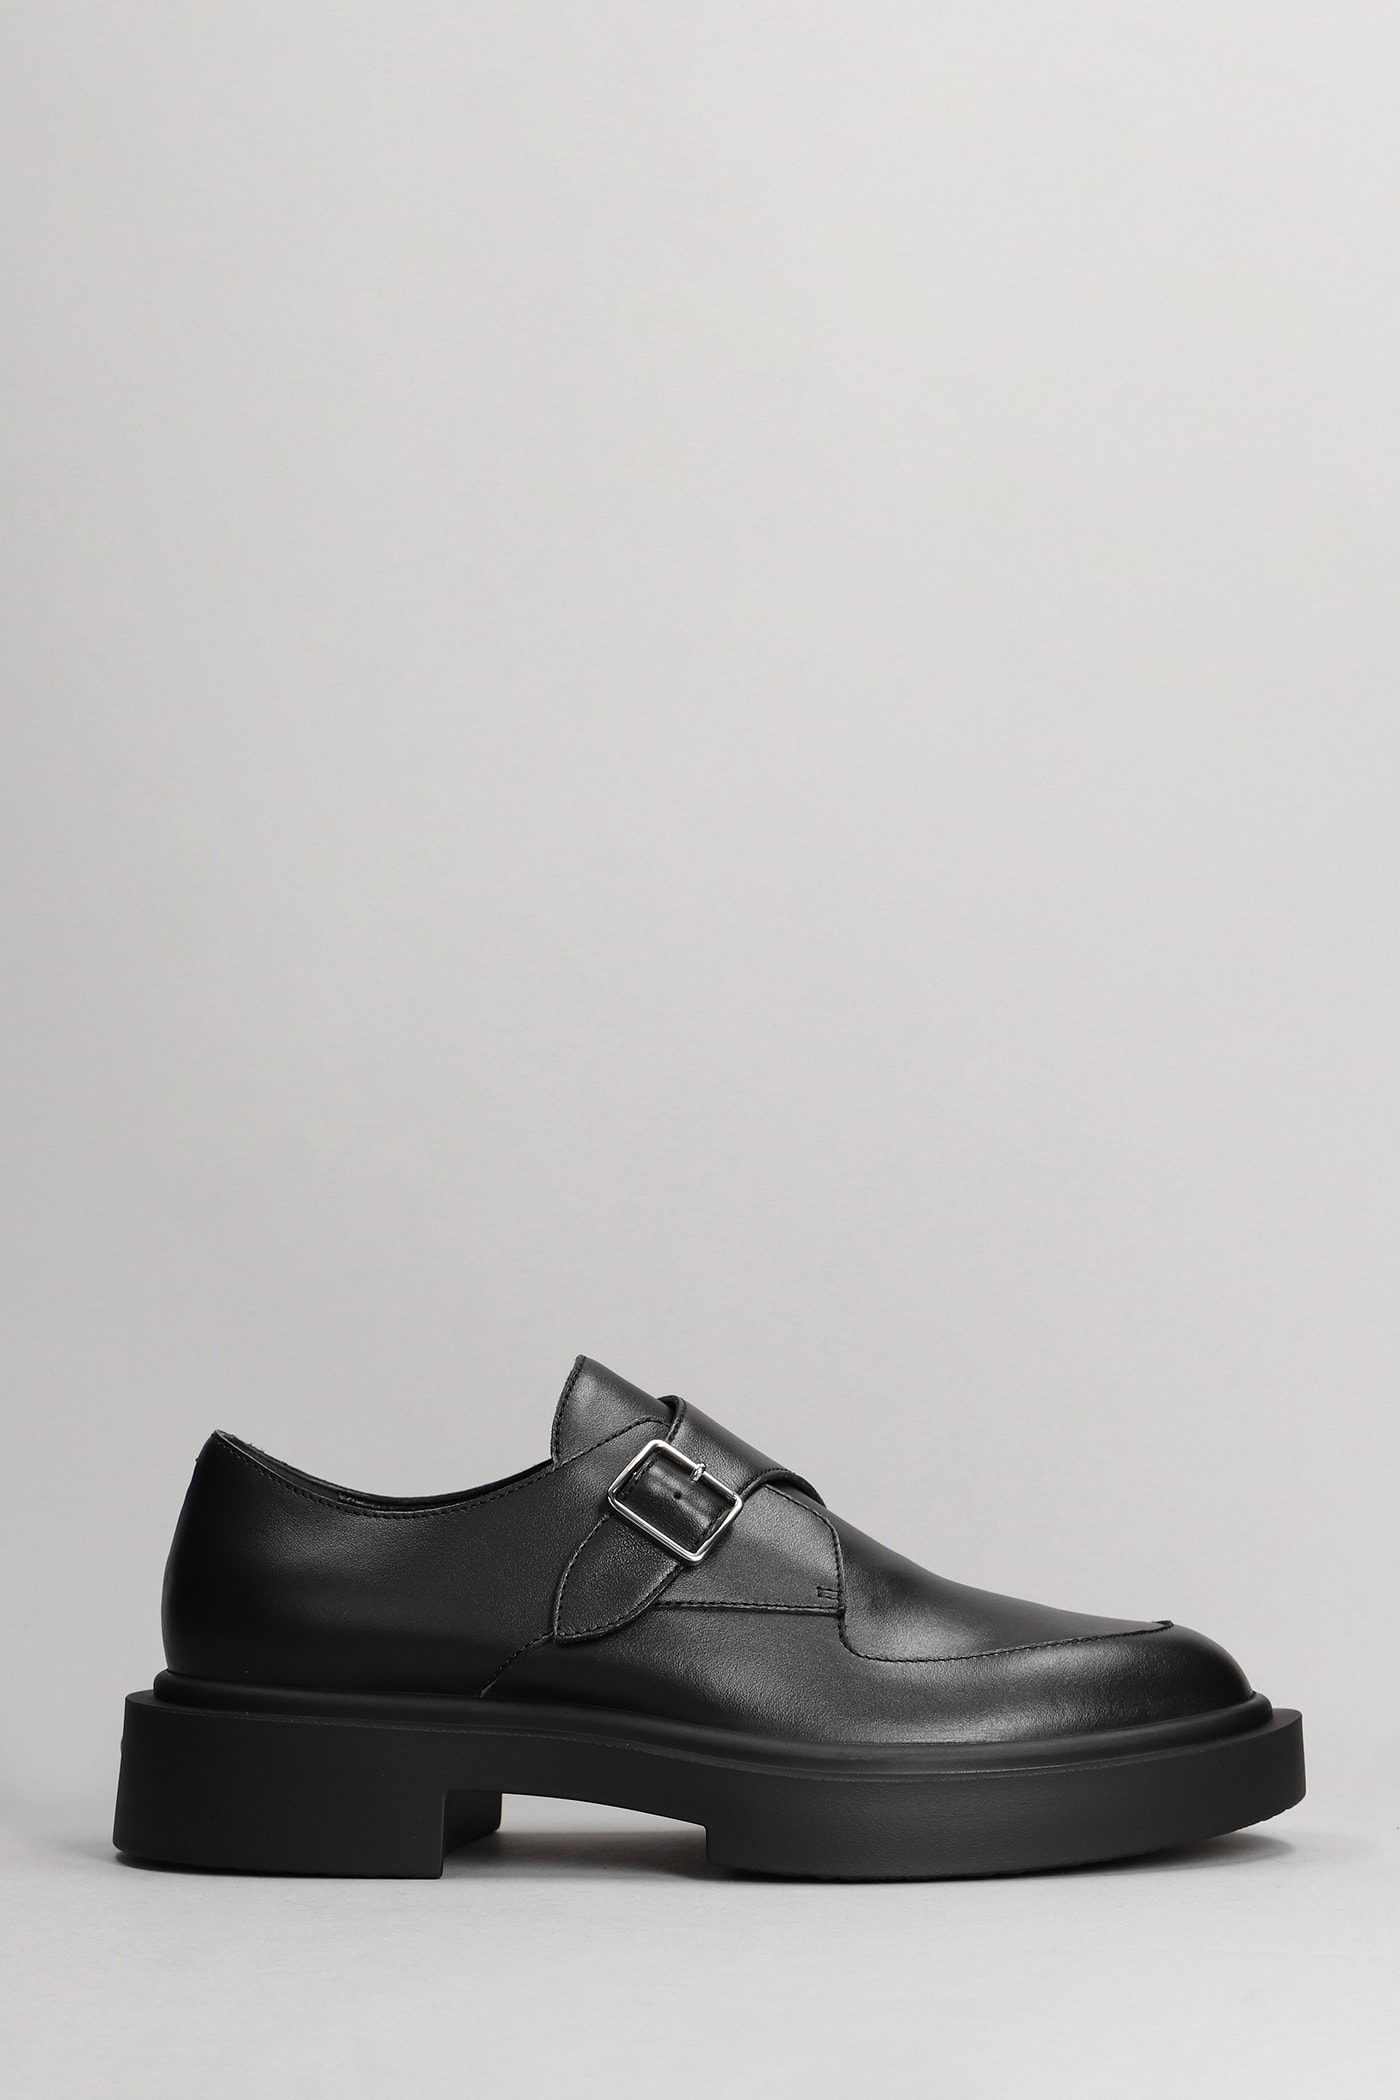 Giuseppe Zanotti Lace Up Shoes In Black Leather